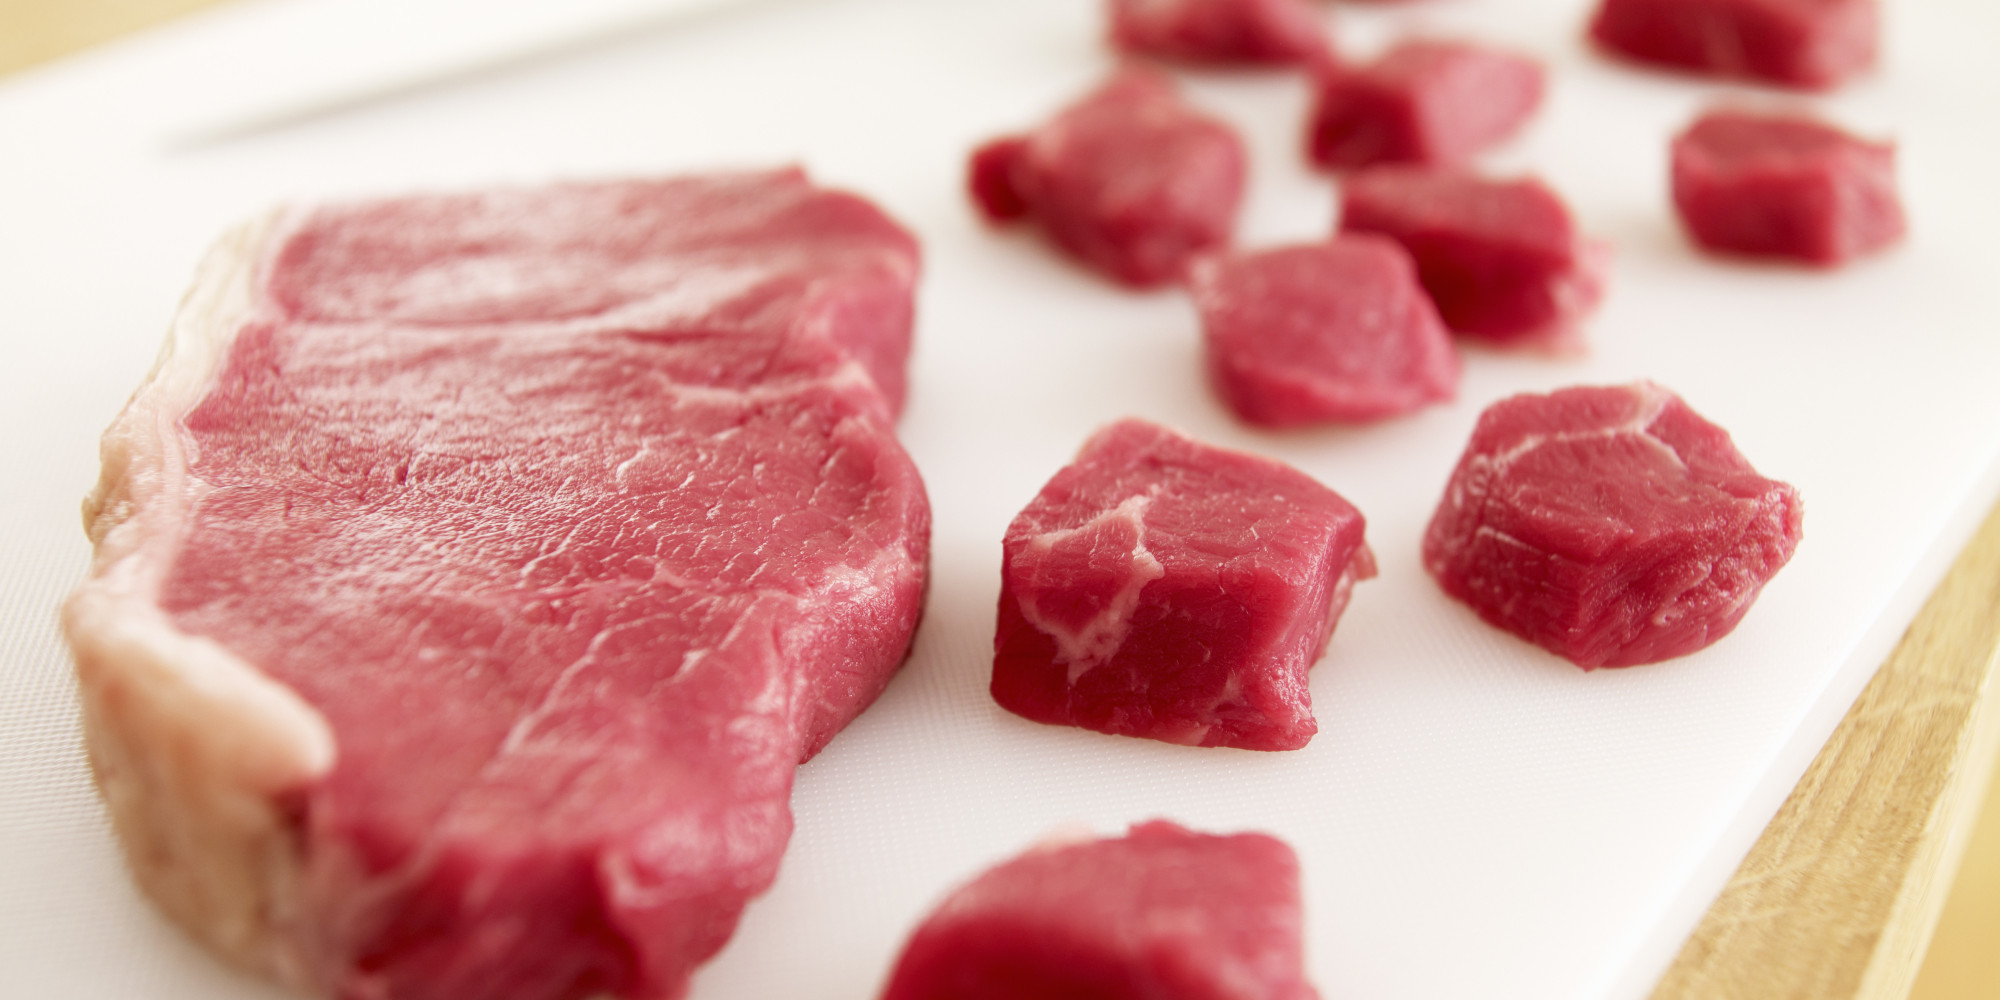 Can You Go To A Steakhouse And Order A Completely Raw Steak? | HuffPost